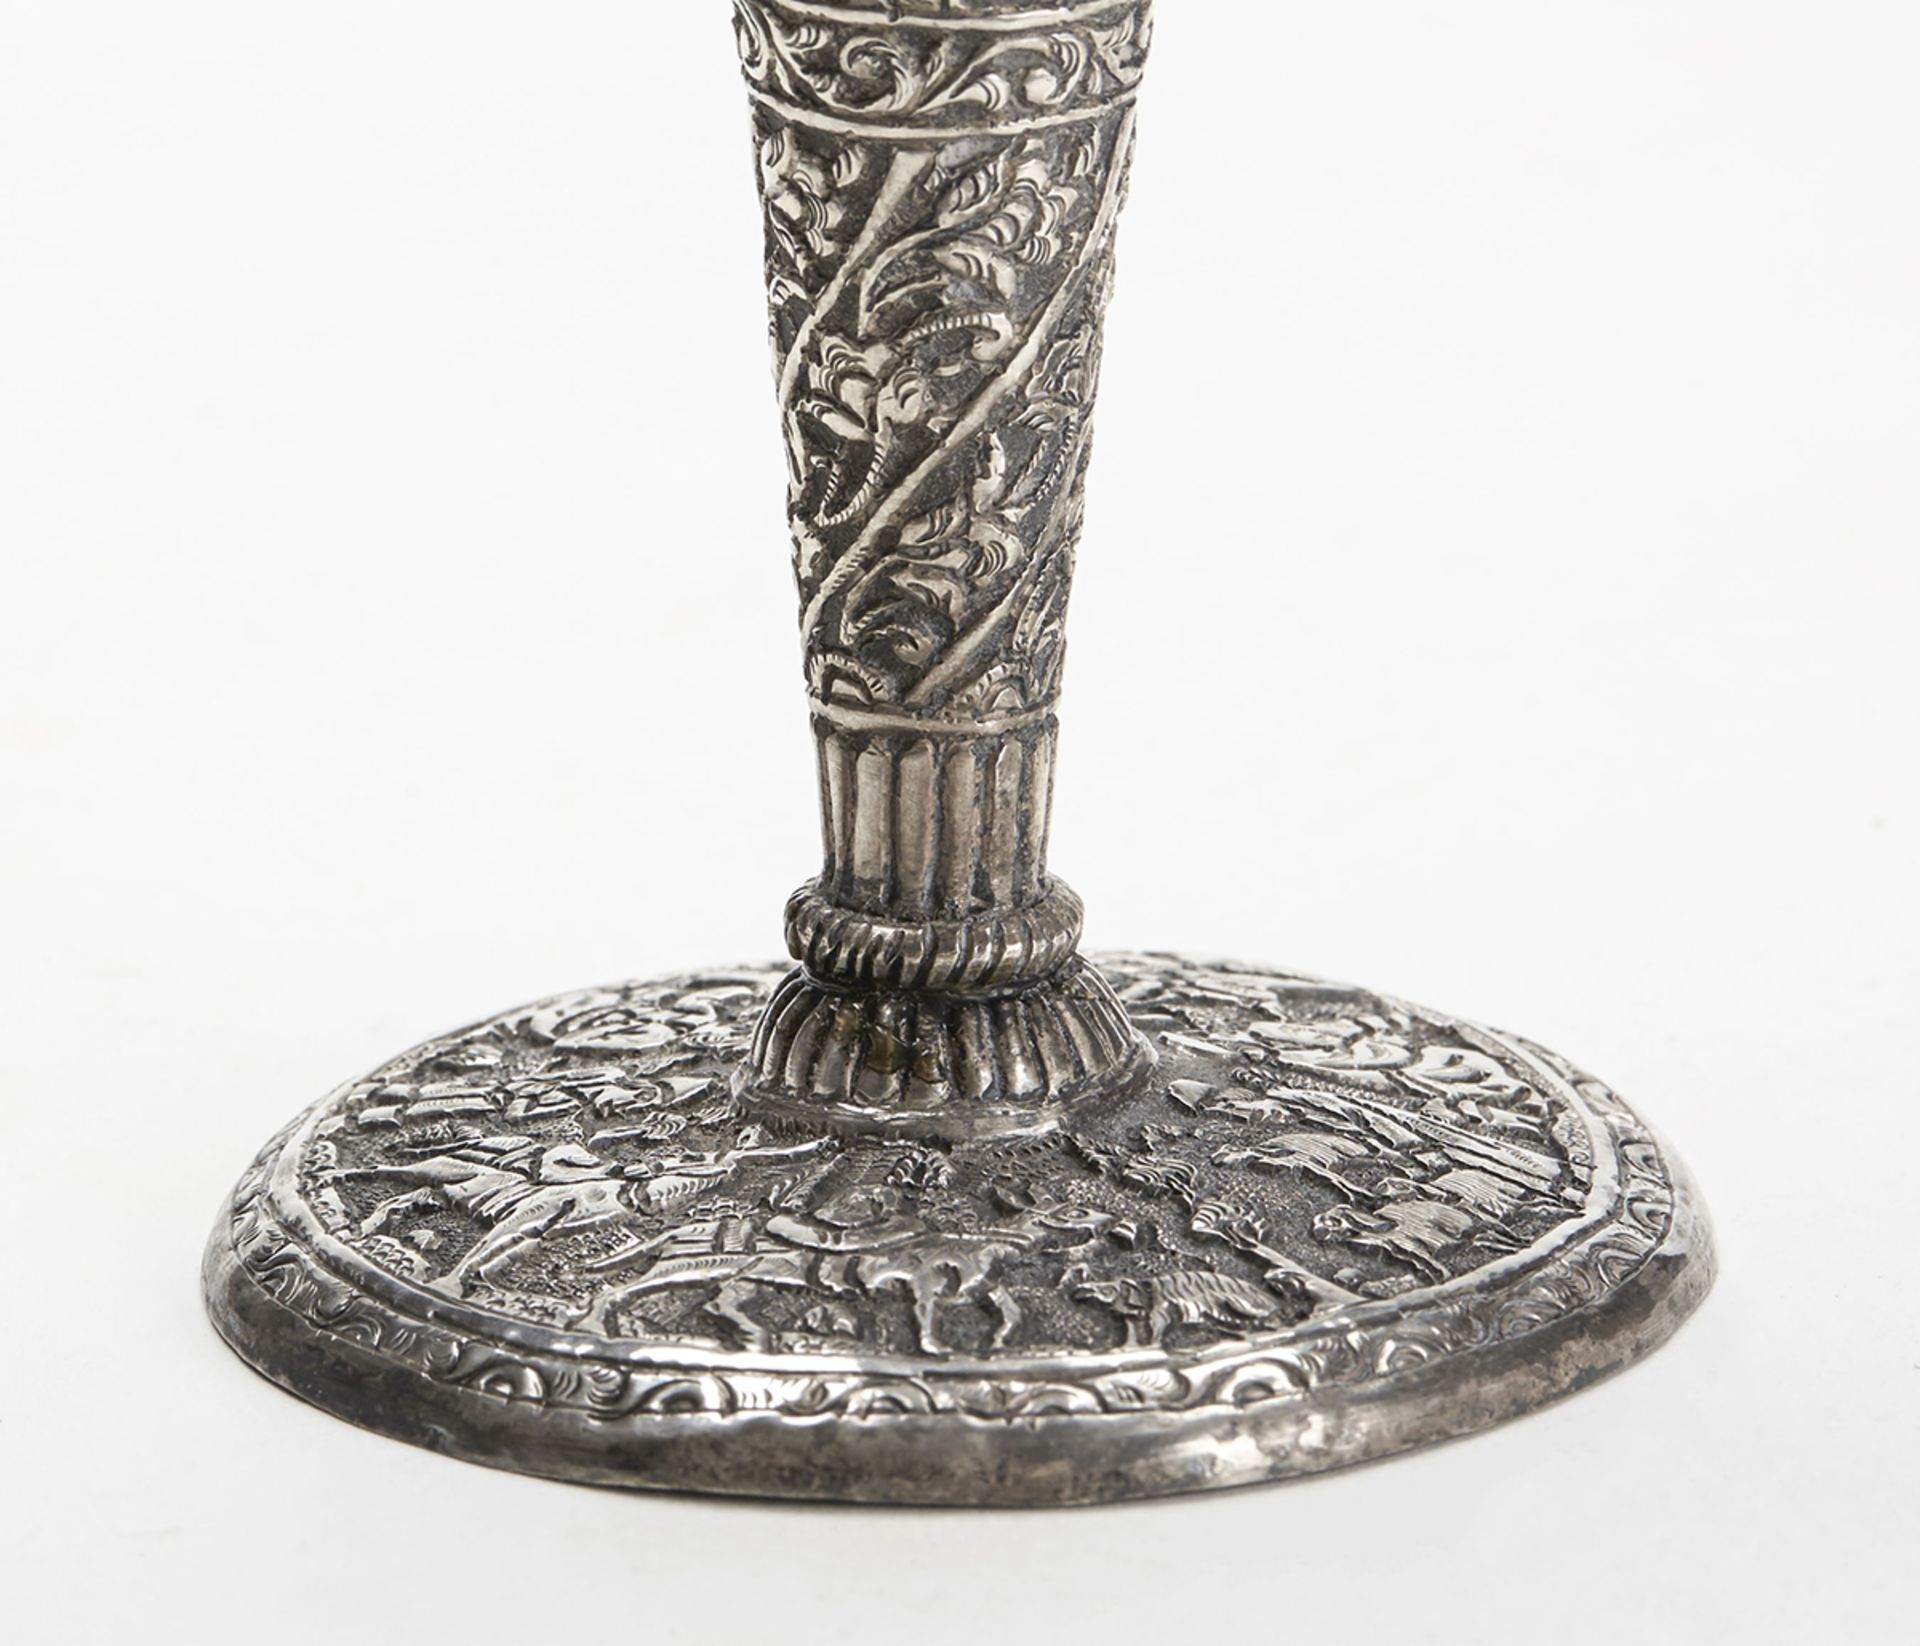 Antique Indian/Asian Silver Figural Vase 19Th C. - Image 2 of 8